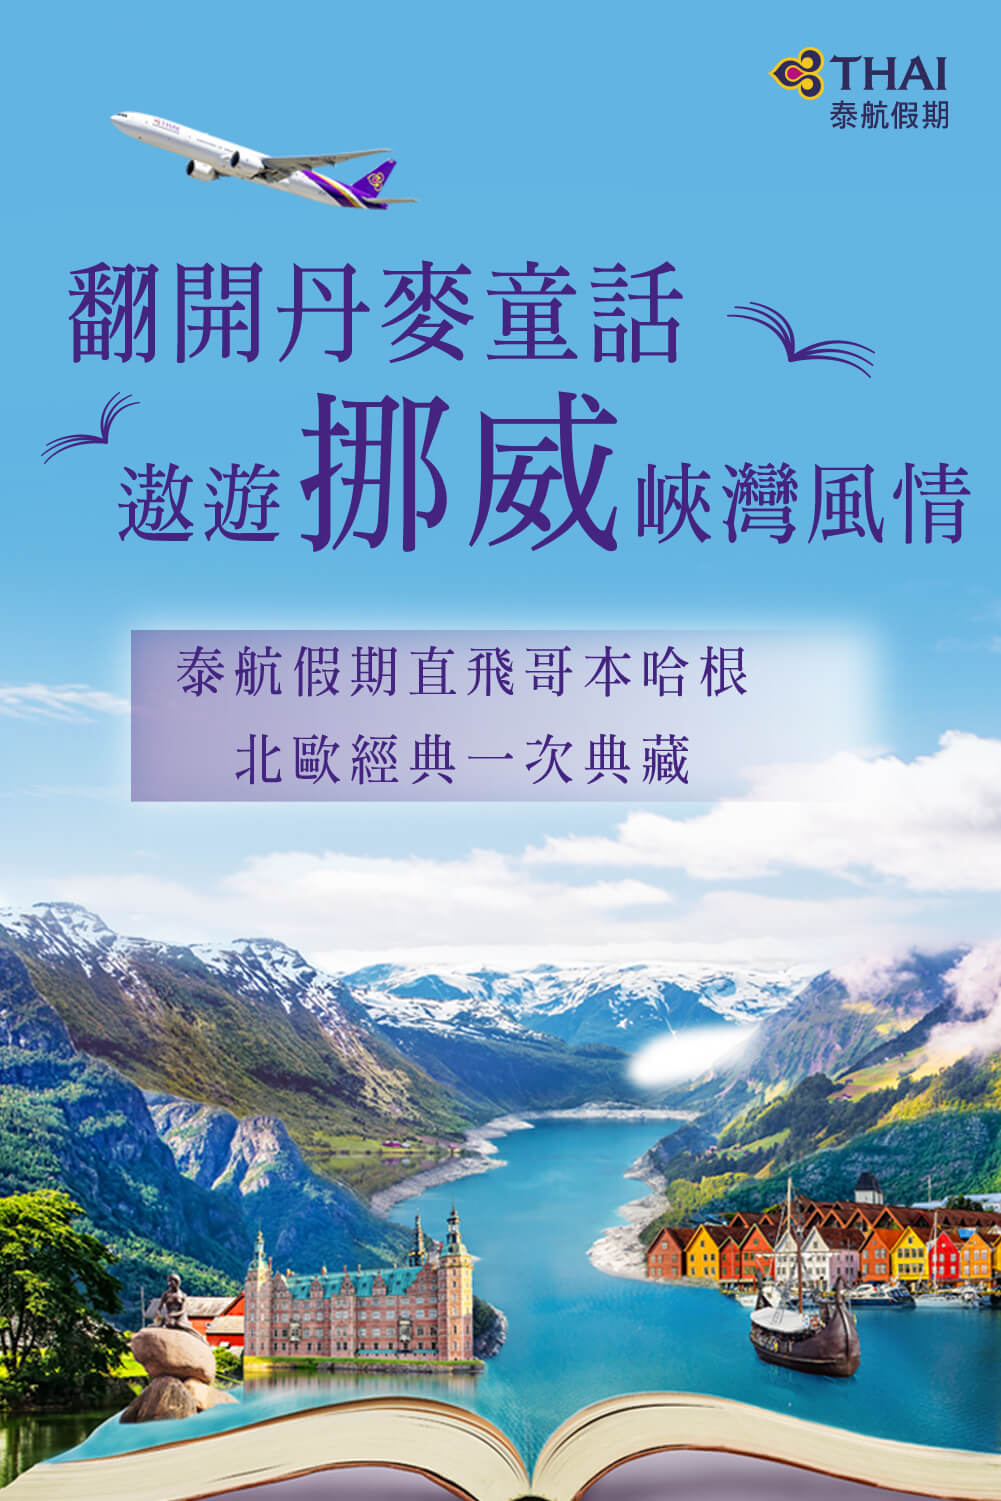 Thai Air Northern Europe promotion